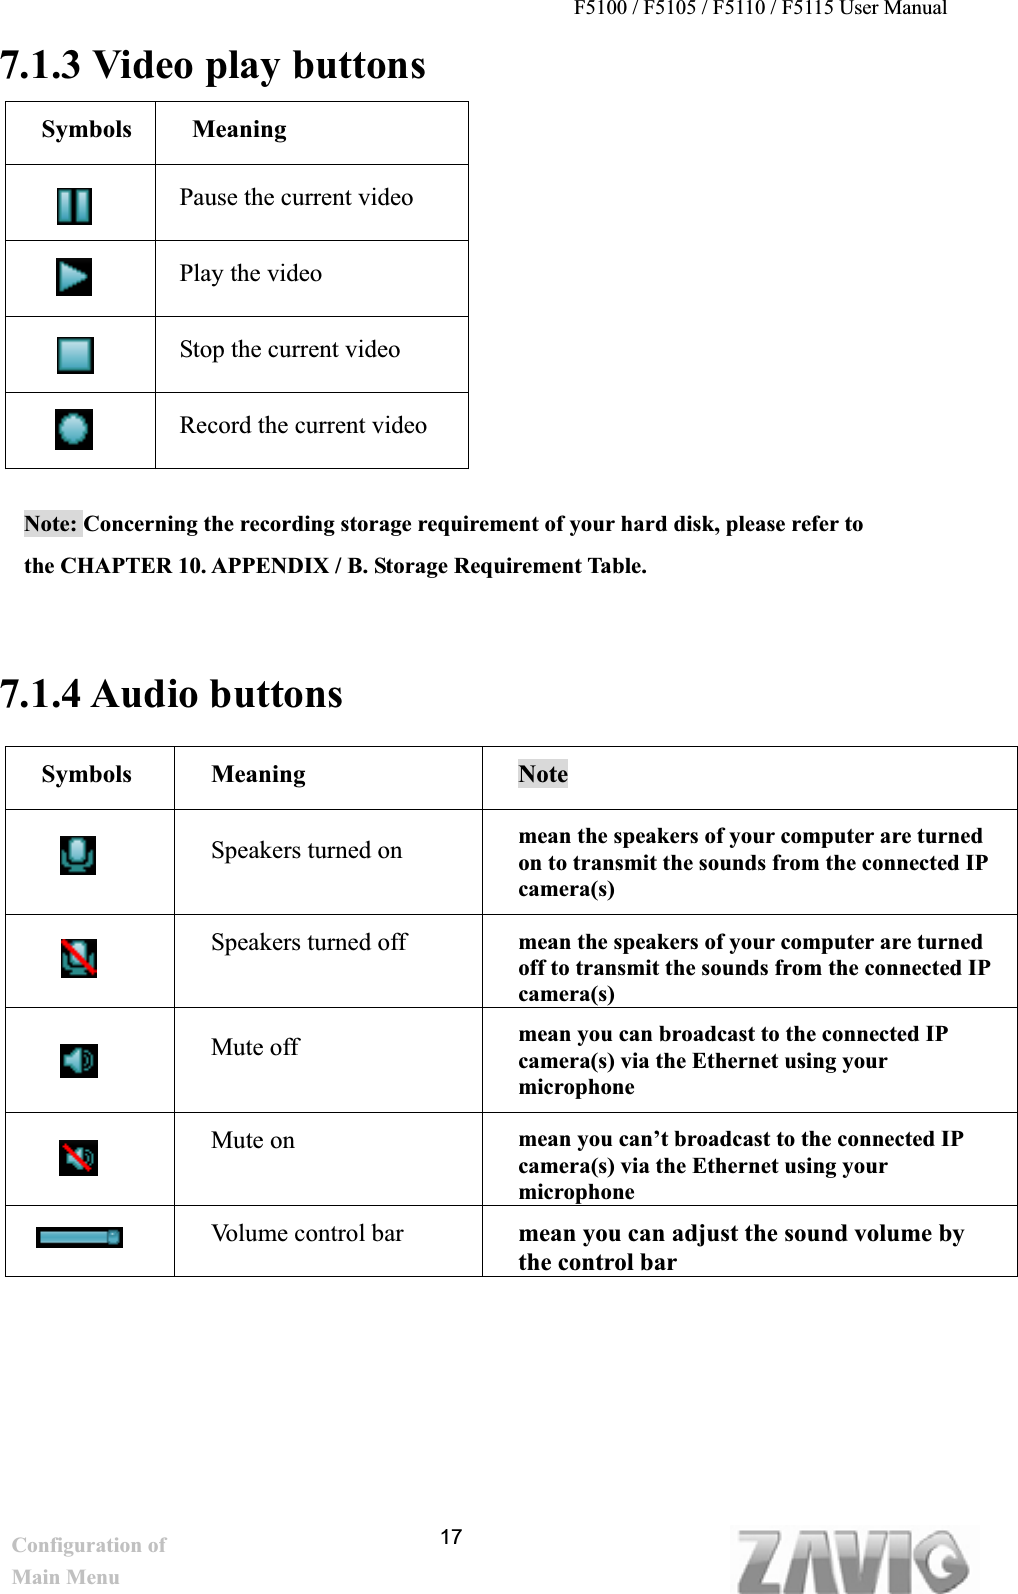 F5100 / F5105 / F5110 / F5115 User Manual   7.1.3 Video play buttons Symbols MeaningPause the current video Play the video Stop the current video Record the current video Note: Concerning the recording storage requirement of your hard disk, please refer to                 the CHAPTER 10. APPENDIX / B. Storage Requirement Table. 7.1.4 Audio buttons   Symbols Meaning NoteSpeakers turned on  mean the speakers of your computer are turned on to transmit the sounds from the connected IP camera(s)Speakers turned off  mean the speakers of your computer are turned off to transmit the sounds from the connected IP camera(s)Mute off     mean you can broadcast to the connected IP camera(s) via the Ethernet using your microphoneMute on  mean you can’t broadcast to the connected IP camera(s) via the Ethernet using your microphoneVolume control bar  mean you can adjust the sound volume by the control bar Configuration of 17Main Menu 